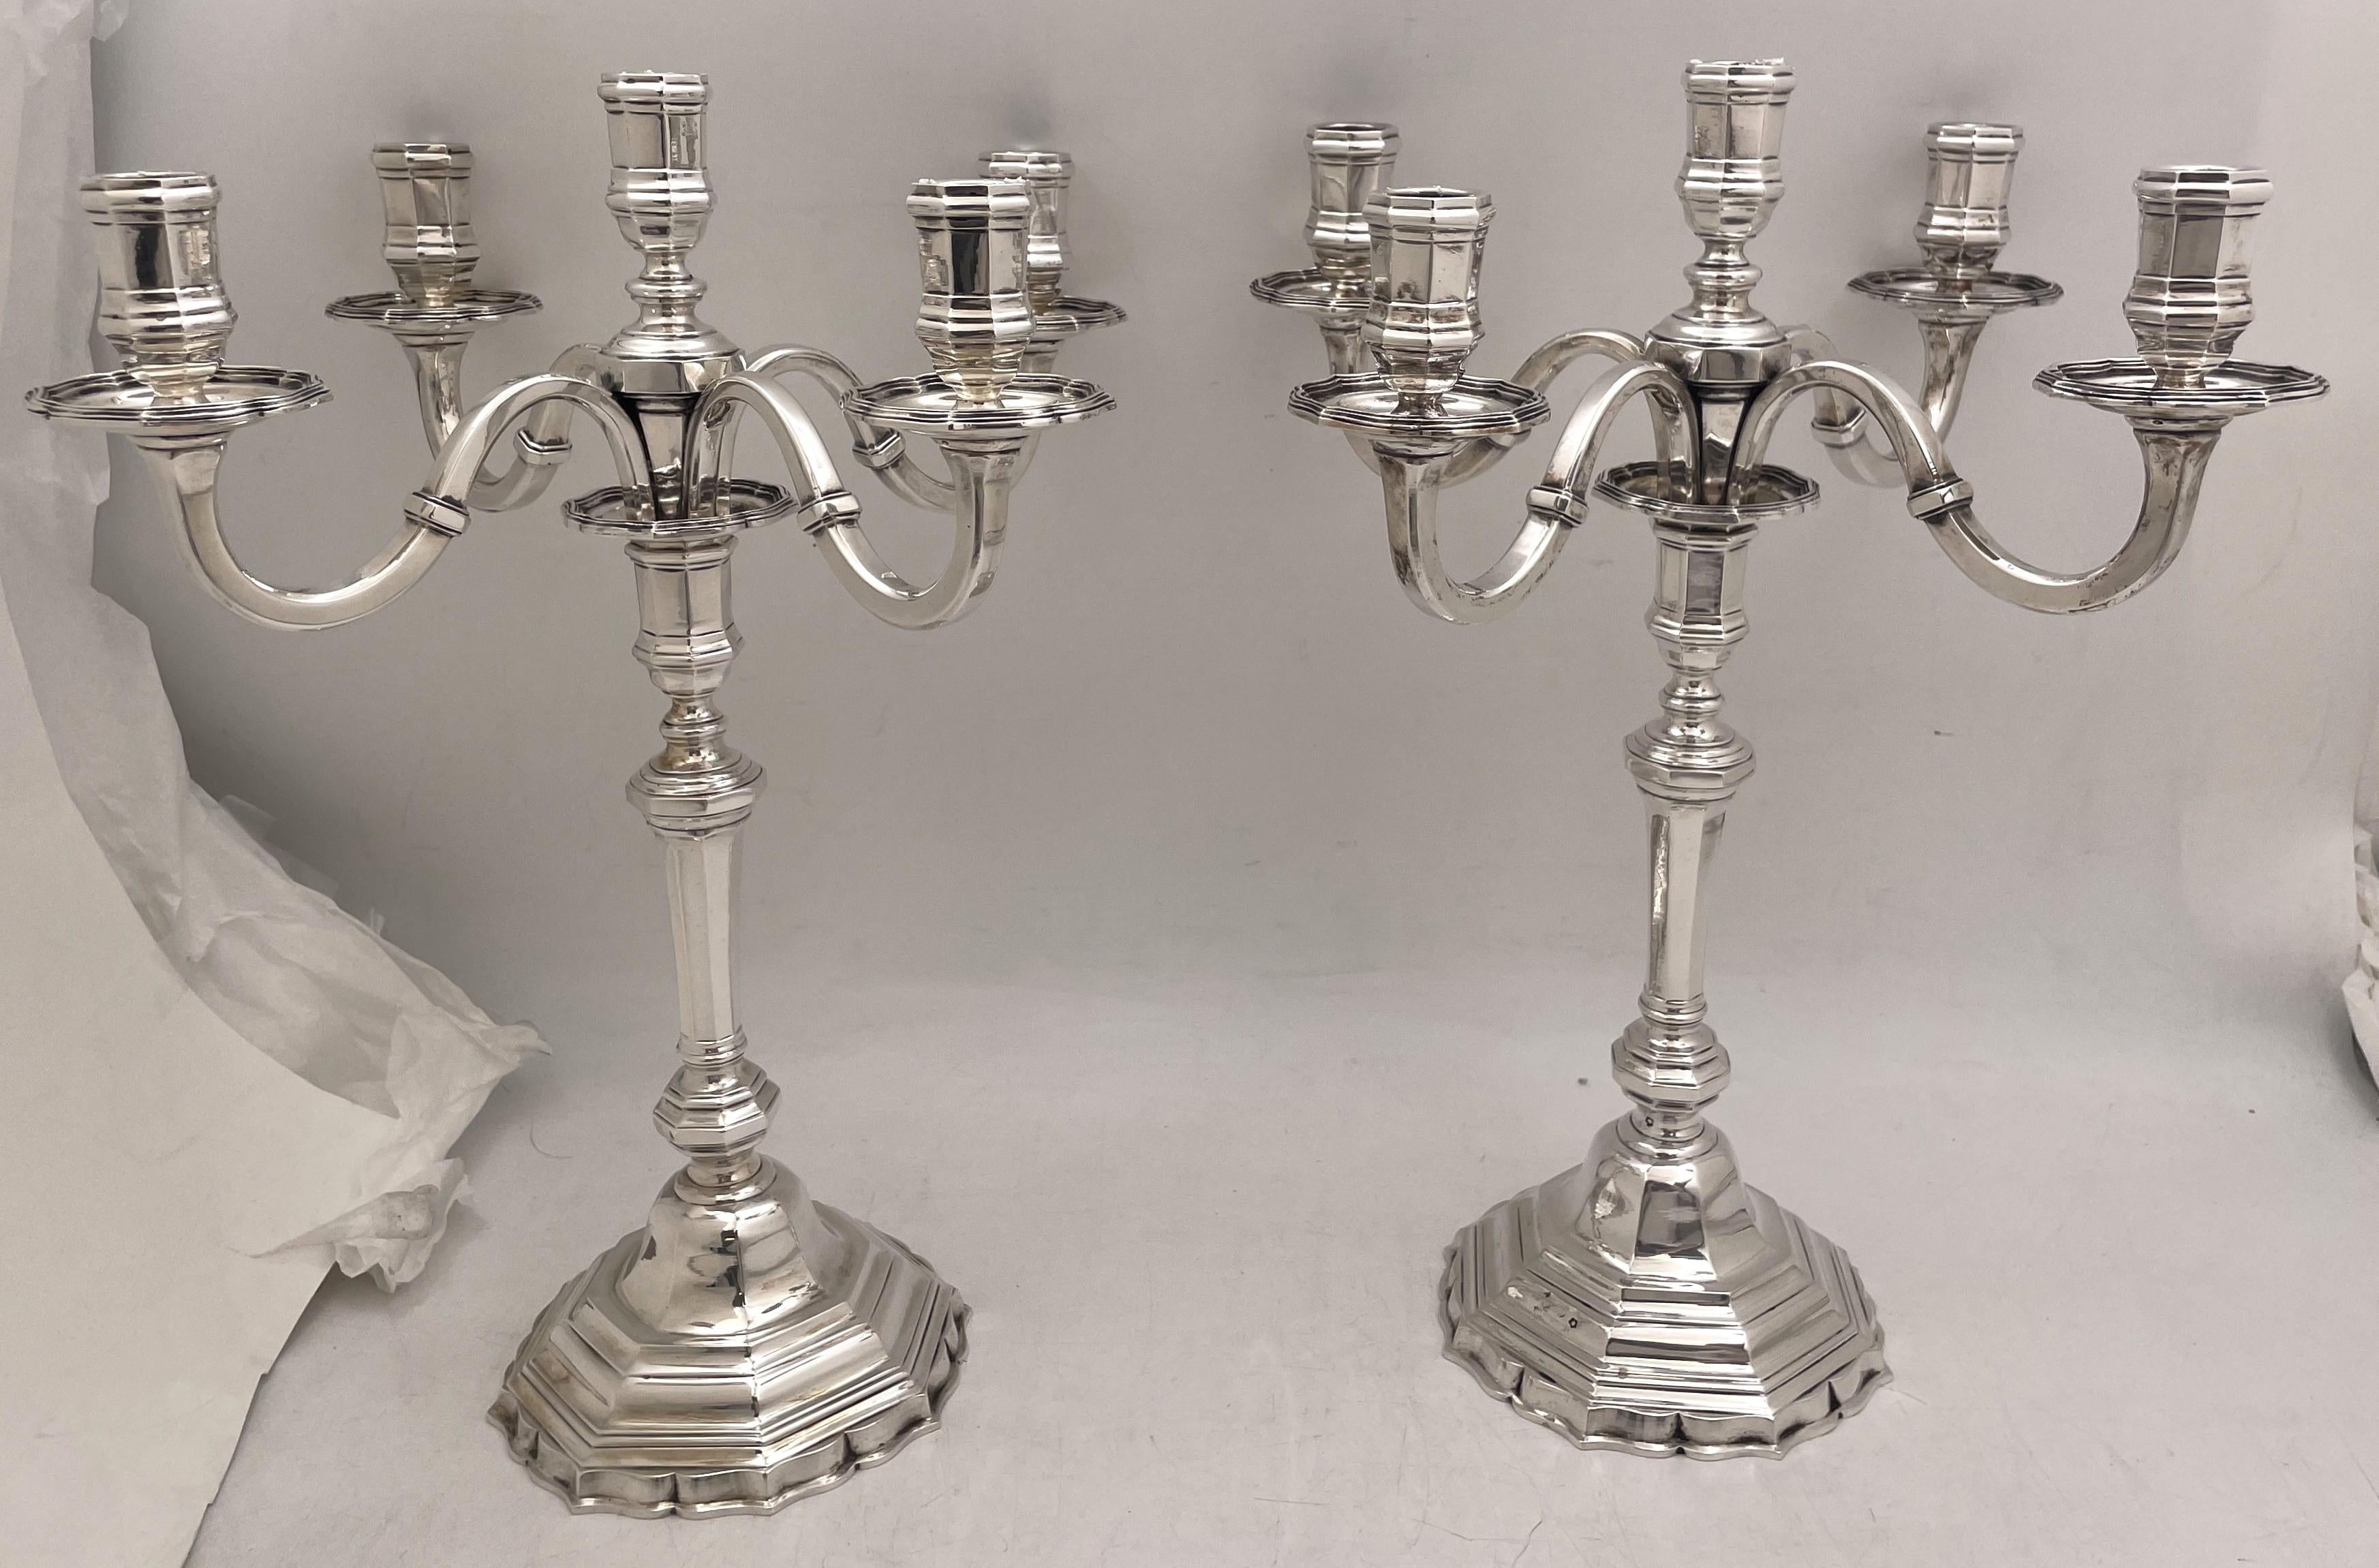 Pair of Schwarz & Steiner, Austrian 0.800 silver 5-light candelabra from early 20th century in Art Deco style, with an elegant, geometric design. They measure 15'' in height by 11 3/4'' from arm to arm, weigh 109 troy ounces, and bear hallmarks as